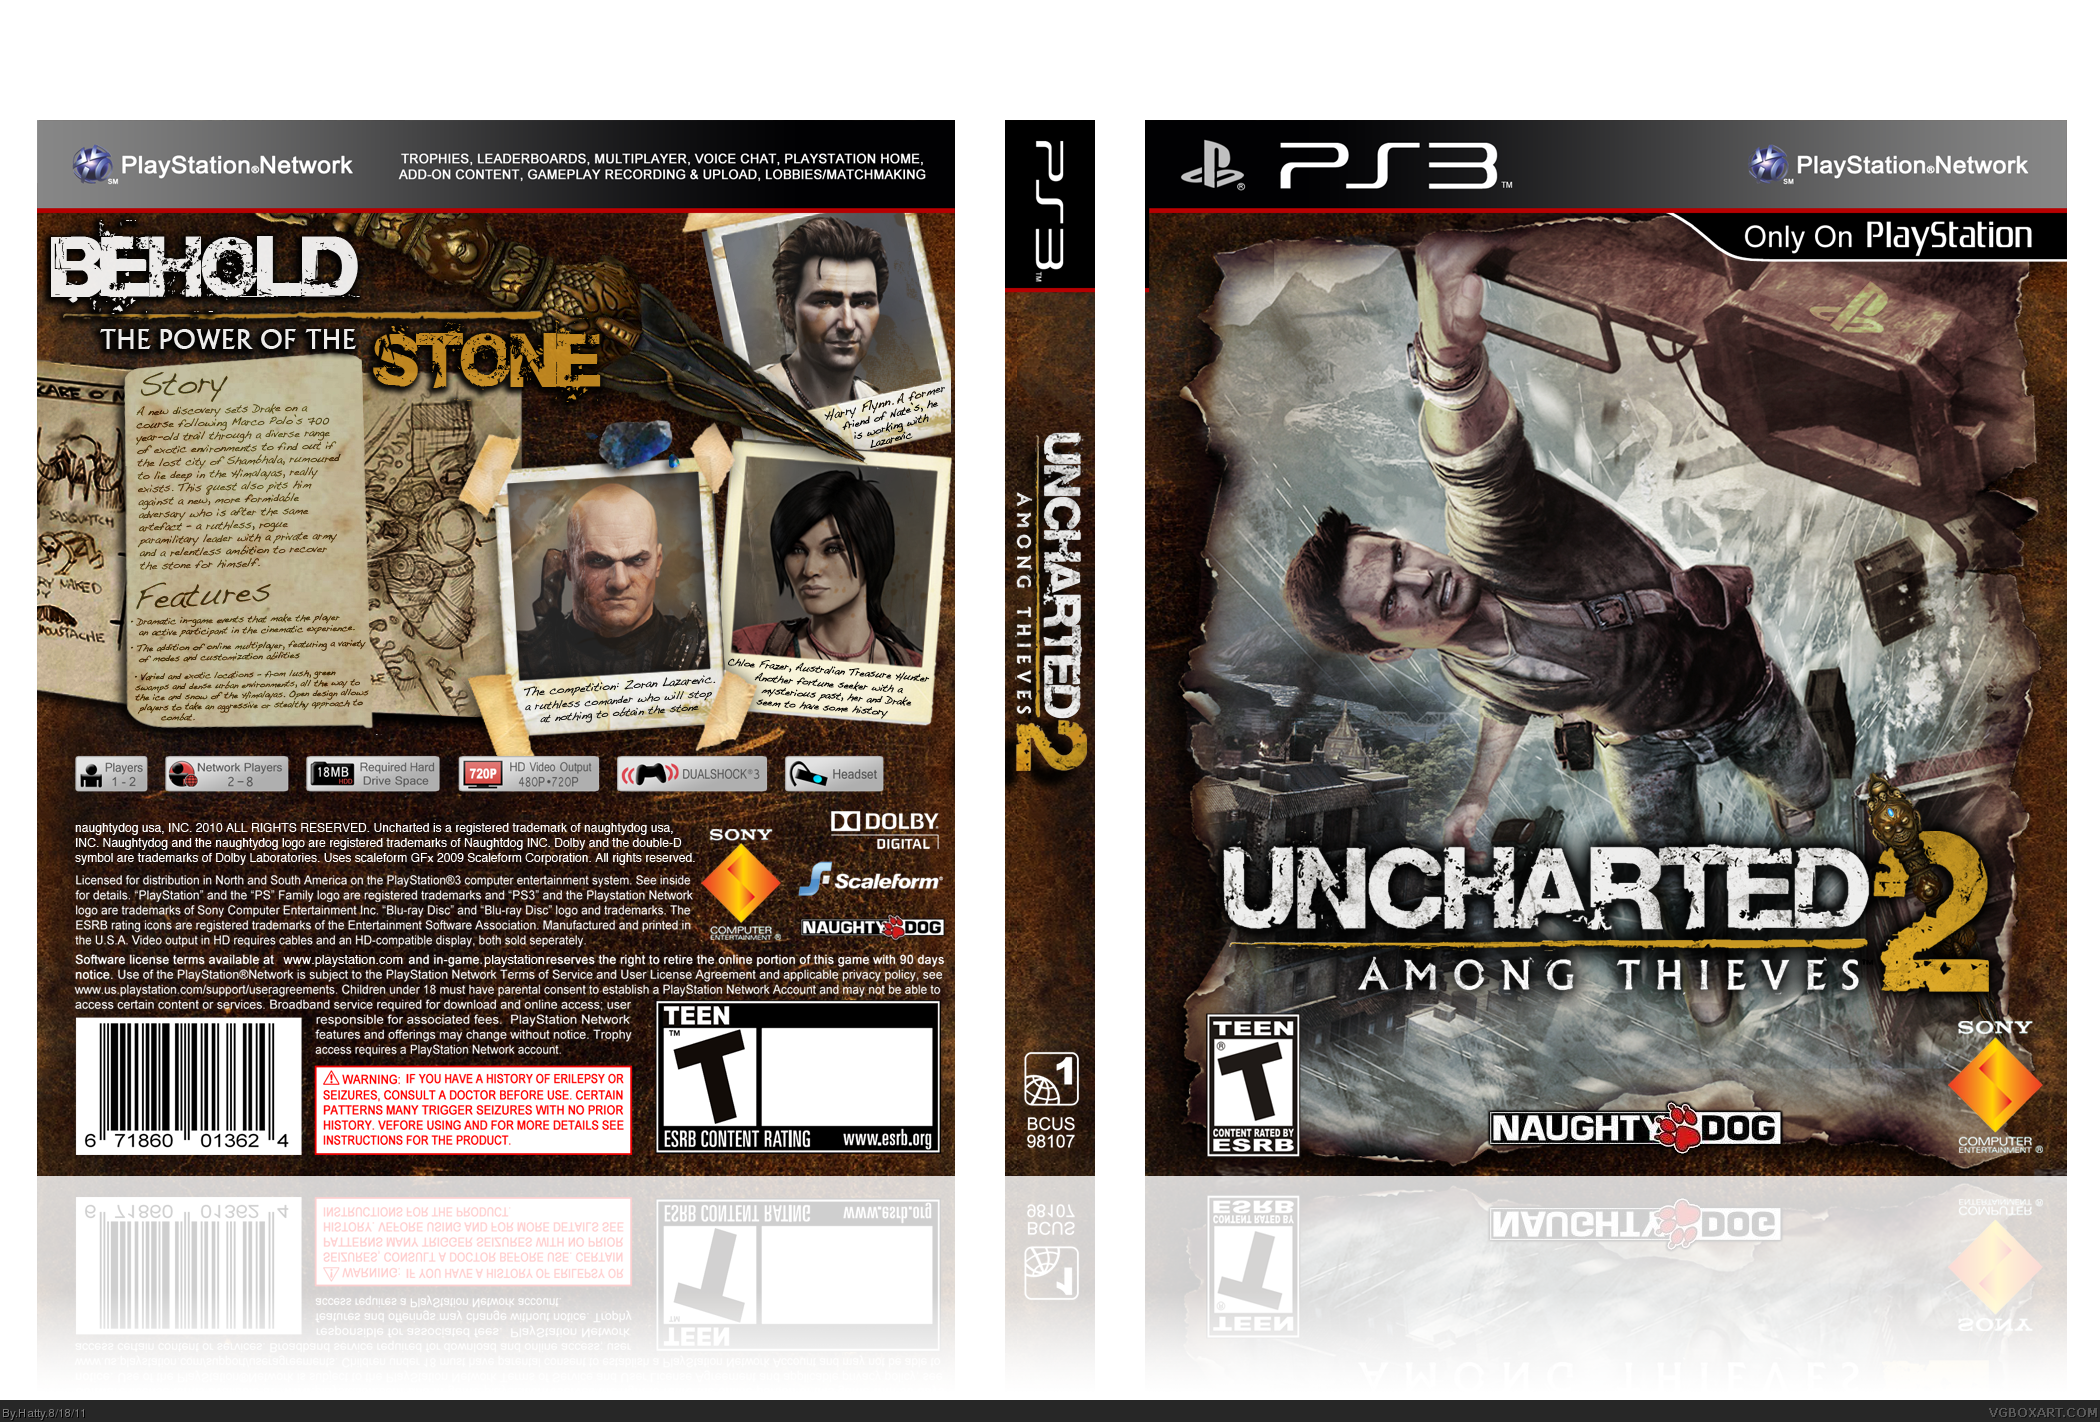 http://vgboxart.com/boxes/PS3/43892-uncharted-2-among-thieves-old-full.png